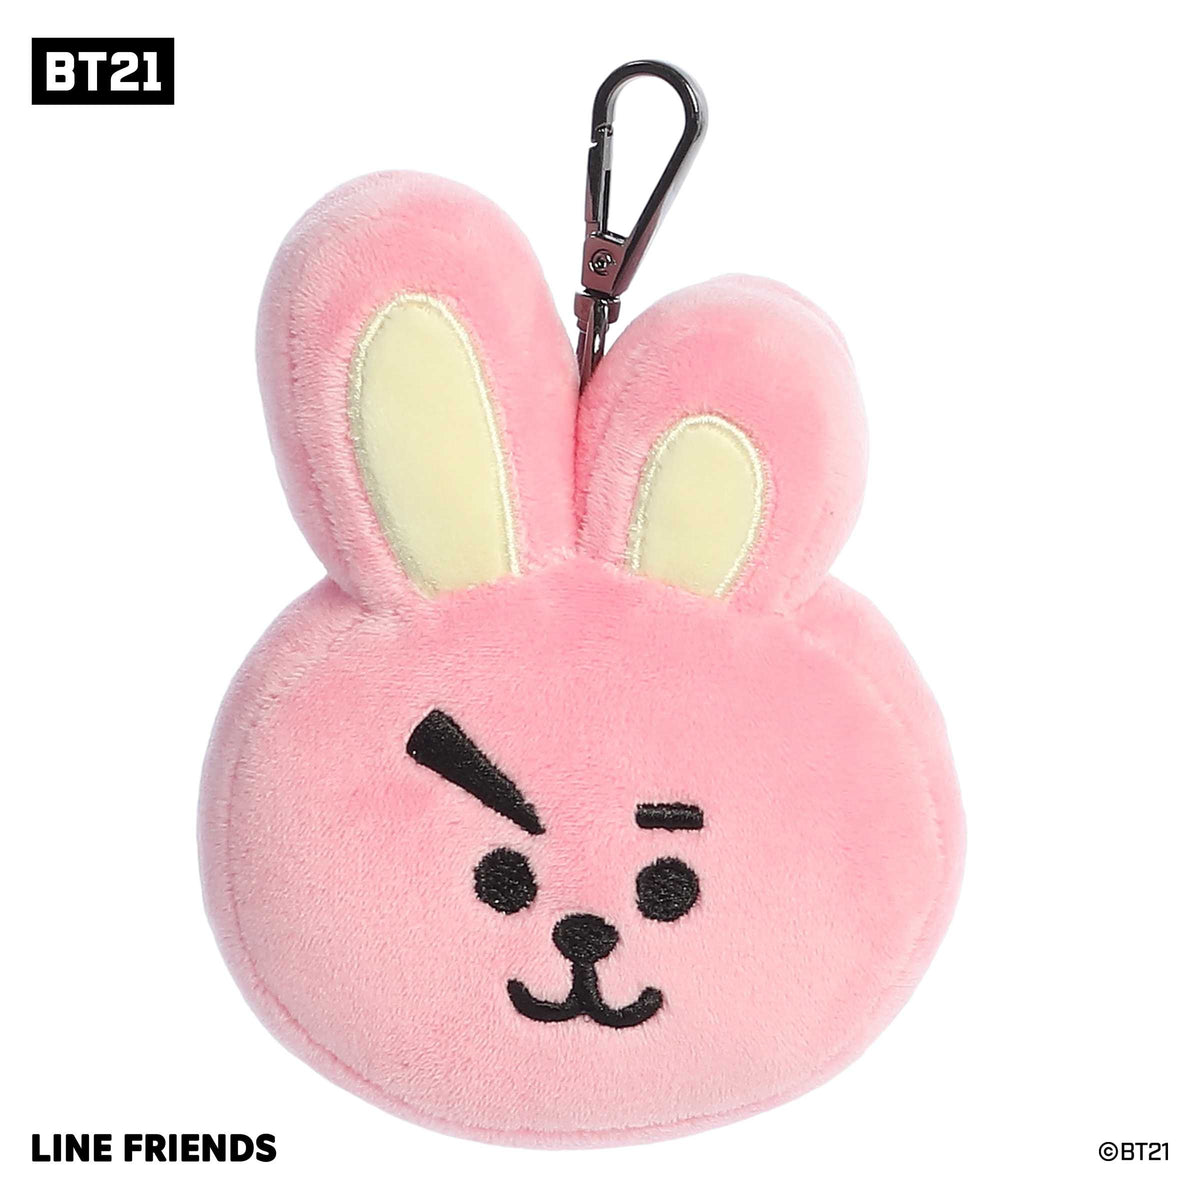 Cute BT21 plush Clip-On with a white and pink soft body, black accents on face, and an attached metal hook